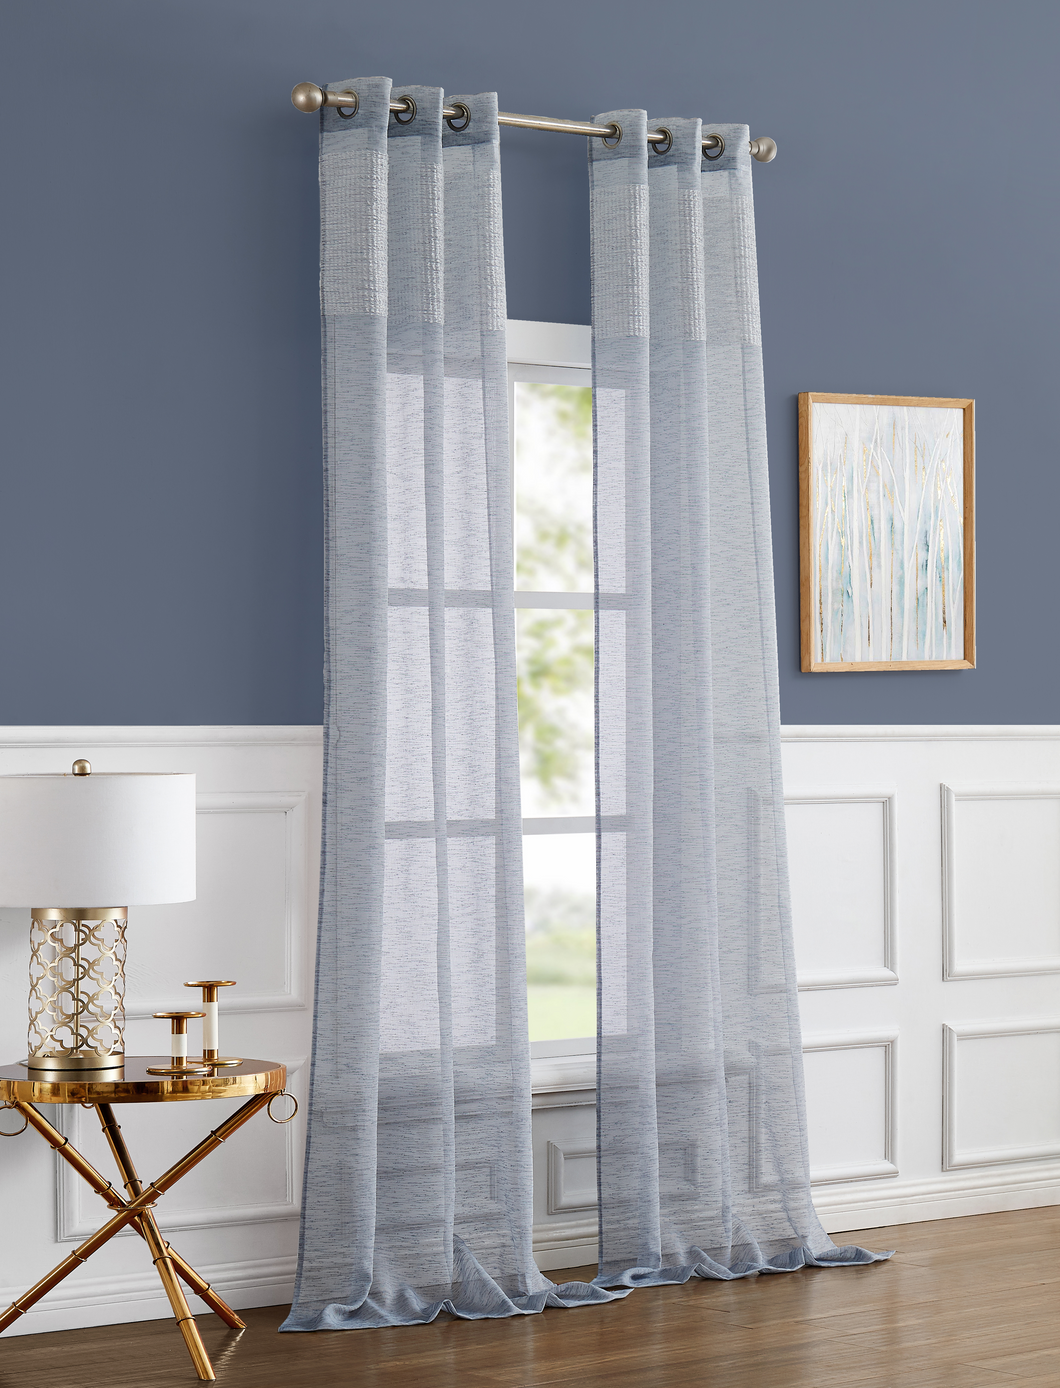 Dainty Home Sarah  Boho 3D Chenille Embroidered Microstripes Design Linen Look Light Filtering Grommet Panel Pair